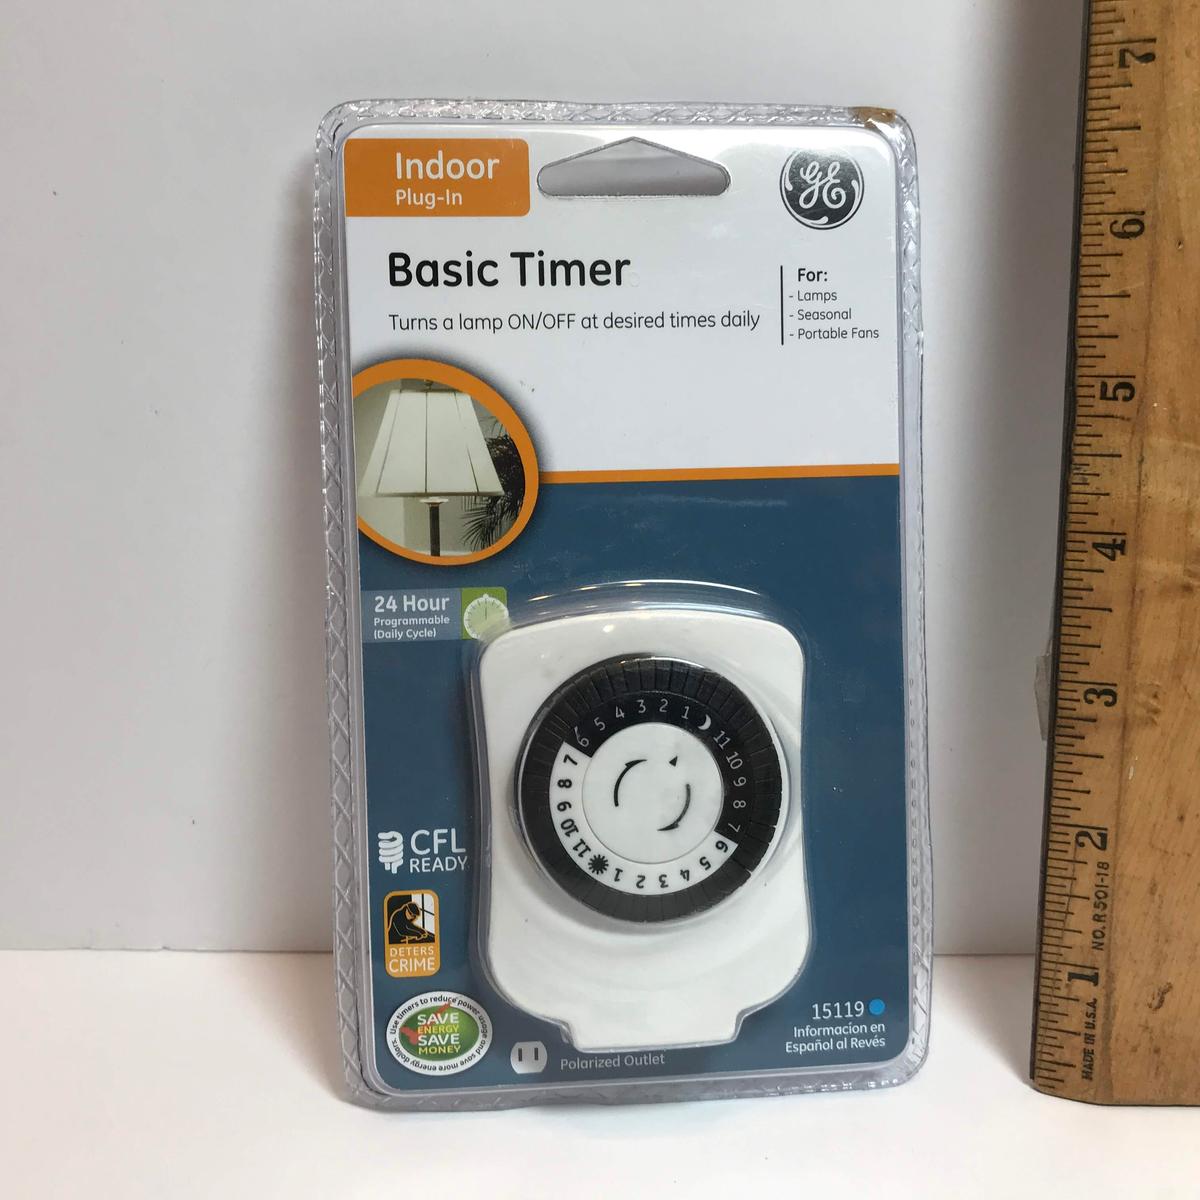 Indoor Plug-in Basic Timer - New in Package